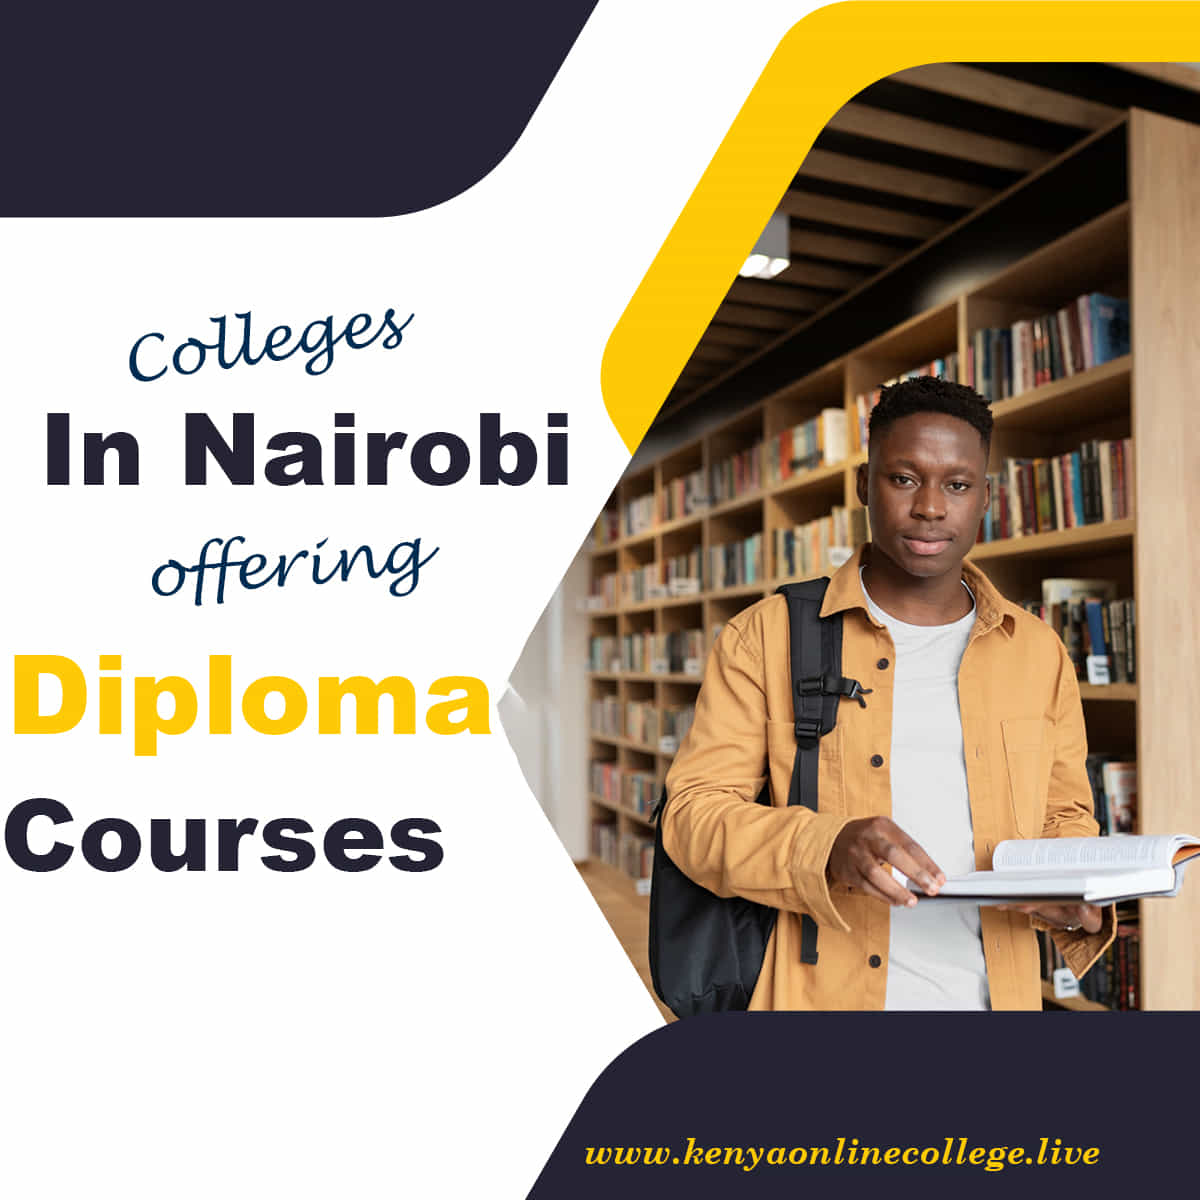 Colleges in Nairobi offering diploma courses